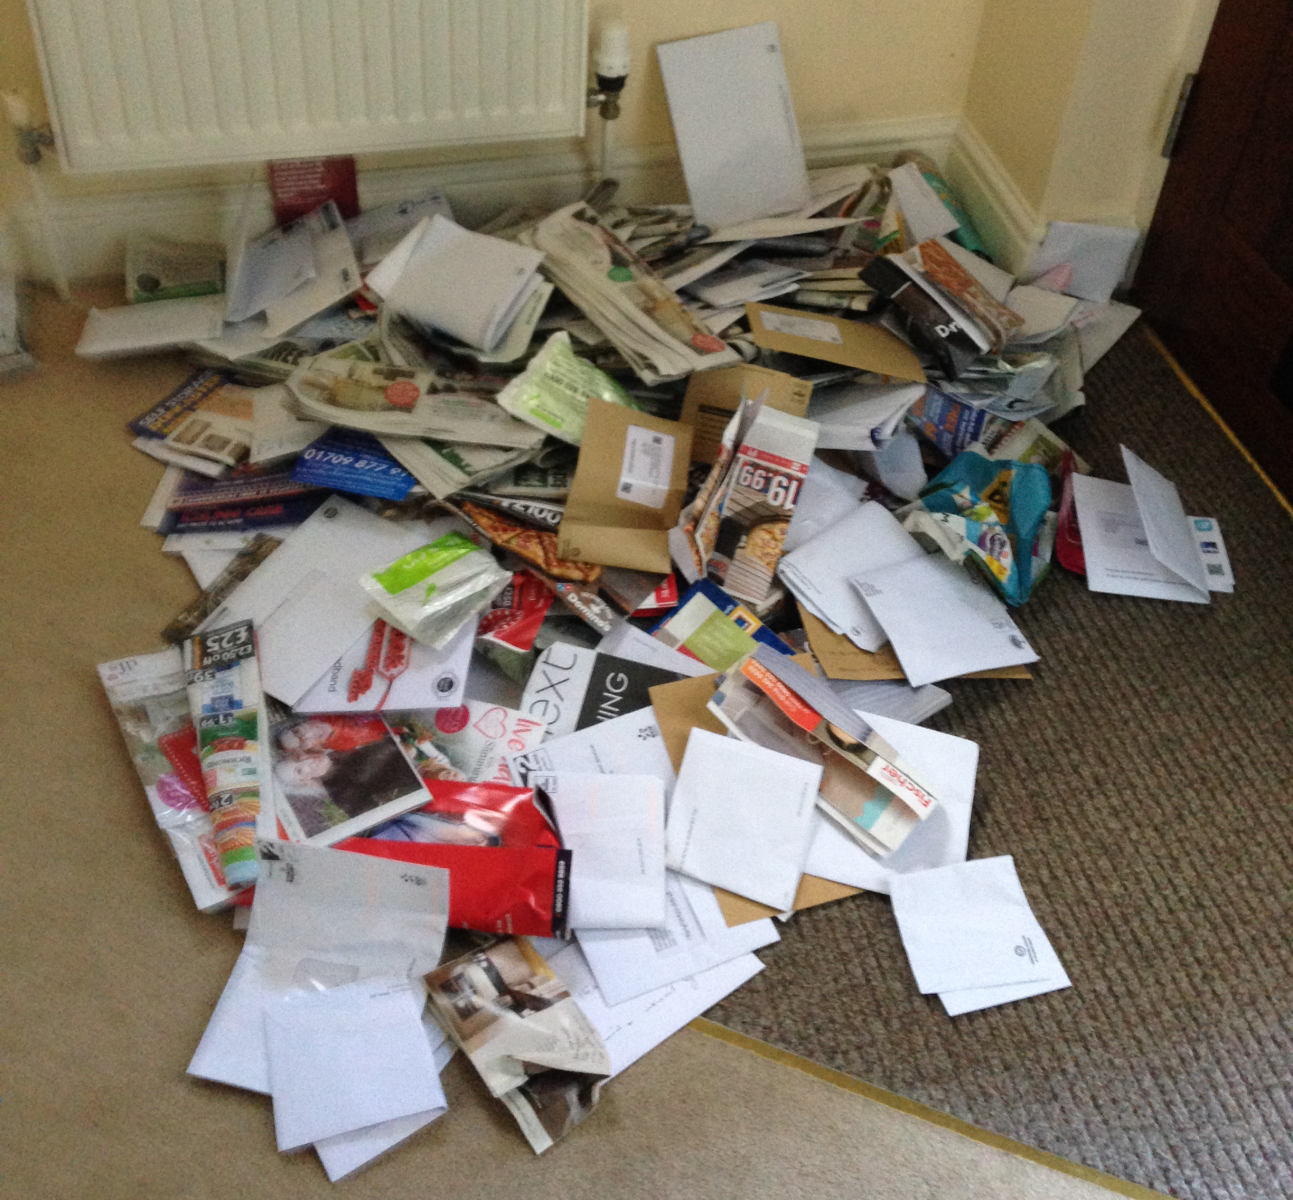 Tonnes of mail left behind